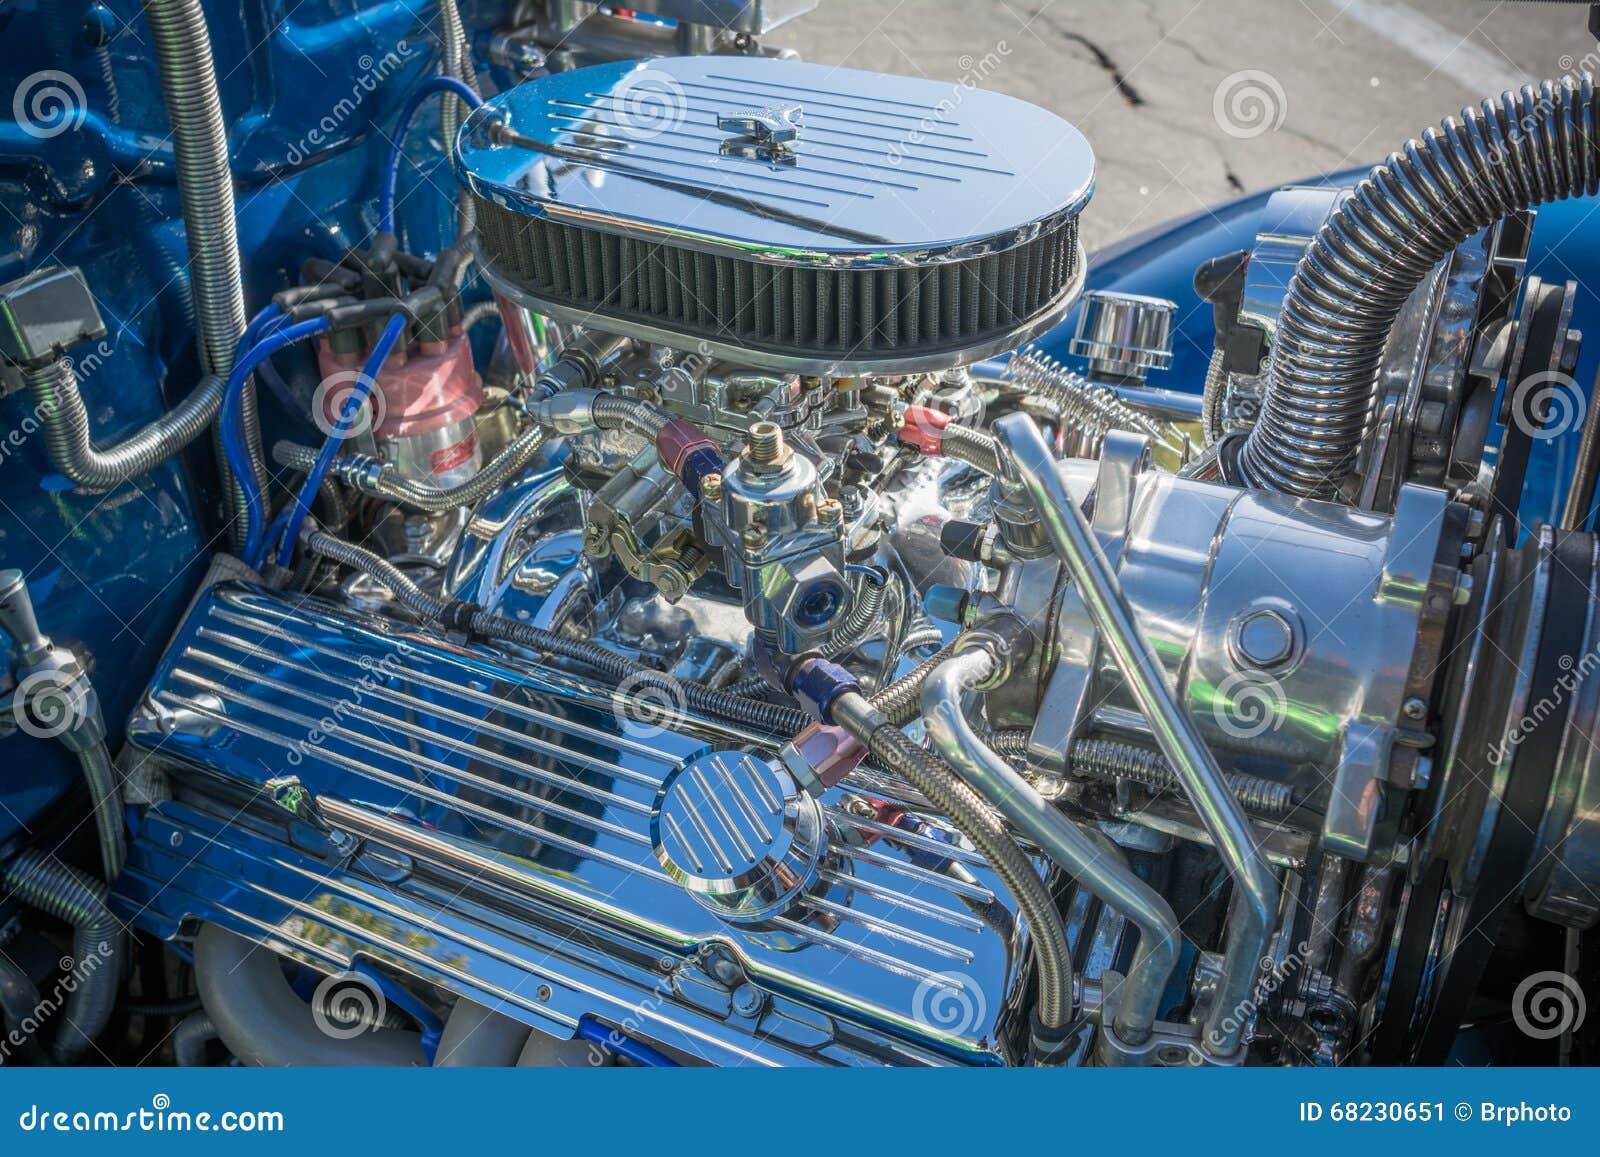 Customized Muscle Car Engine Displayed Editorial Photo - Image of